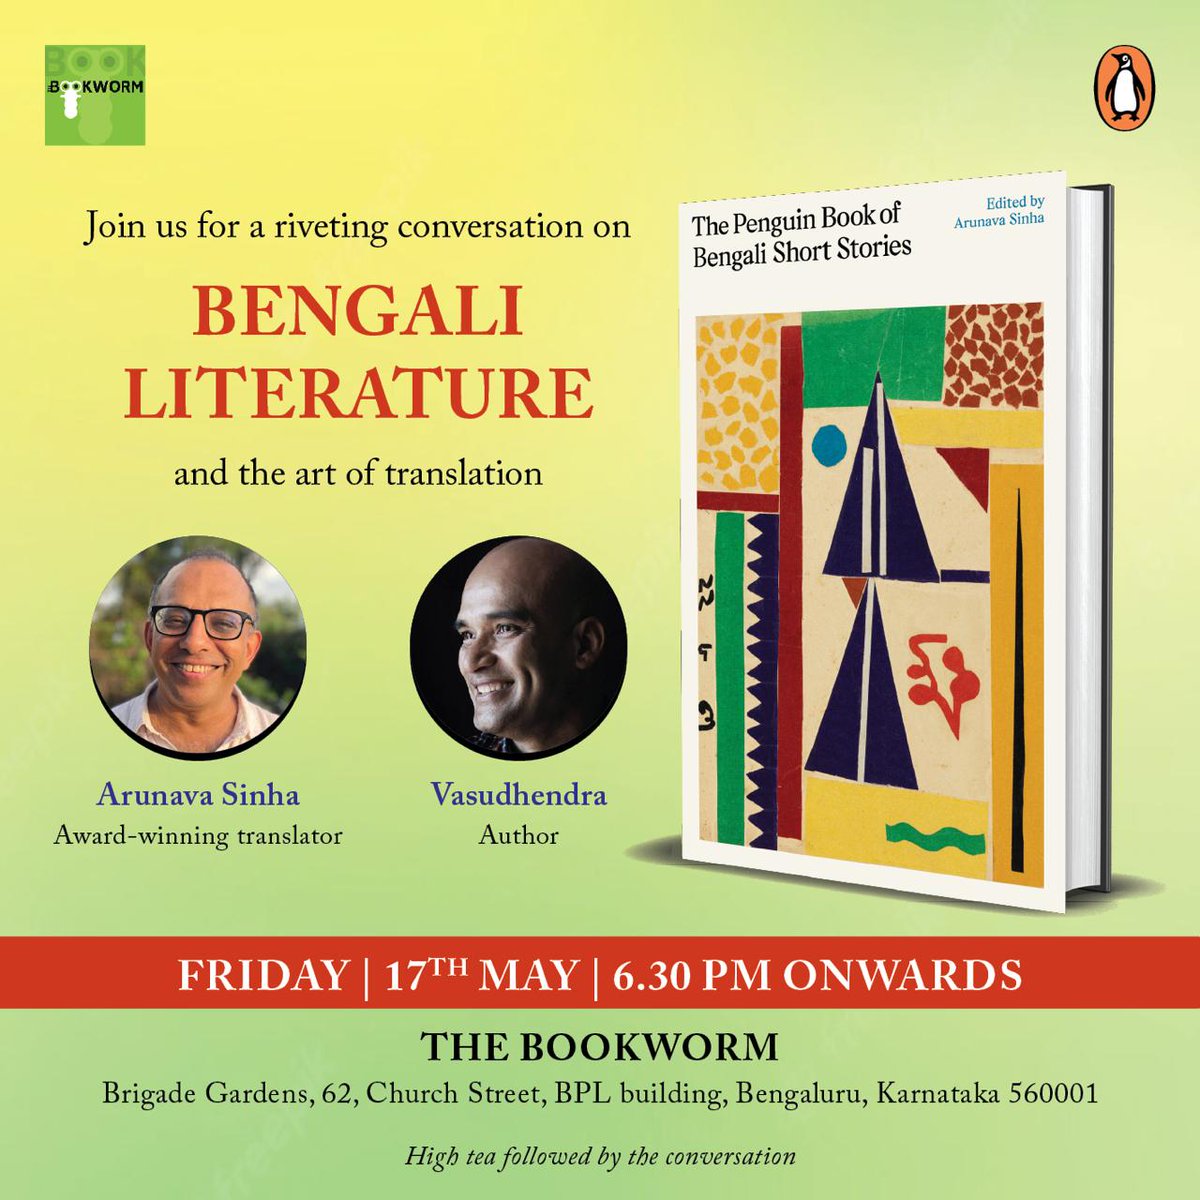 ⚠️A special event this Friday ⚠️ Join us for a riveting conversation between @arunava and @vasudhendra7 on Bengali Literature and The Art of Translation. 6:30 pm on Friday, 17th May. Do come! Do also join us for high tea before the event.